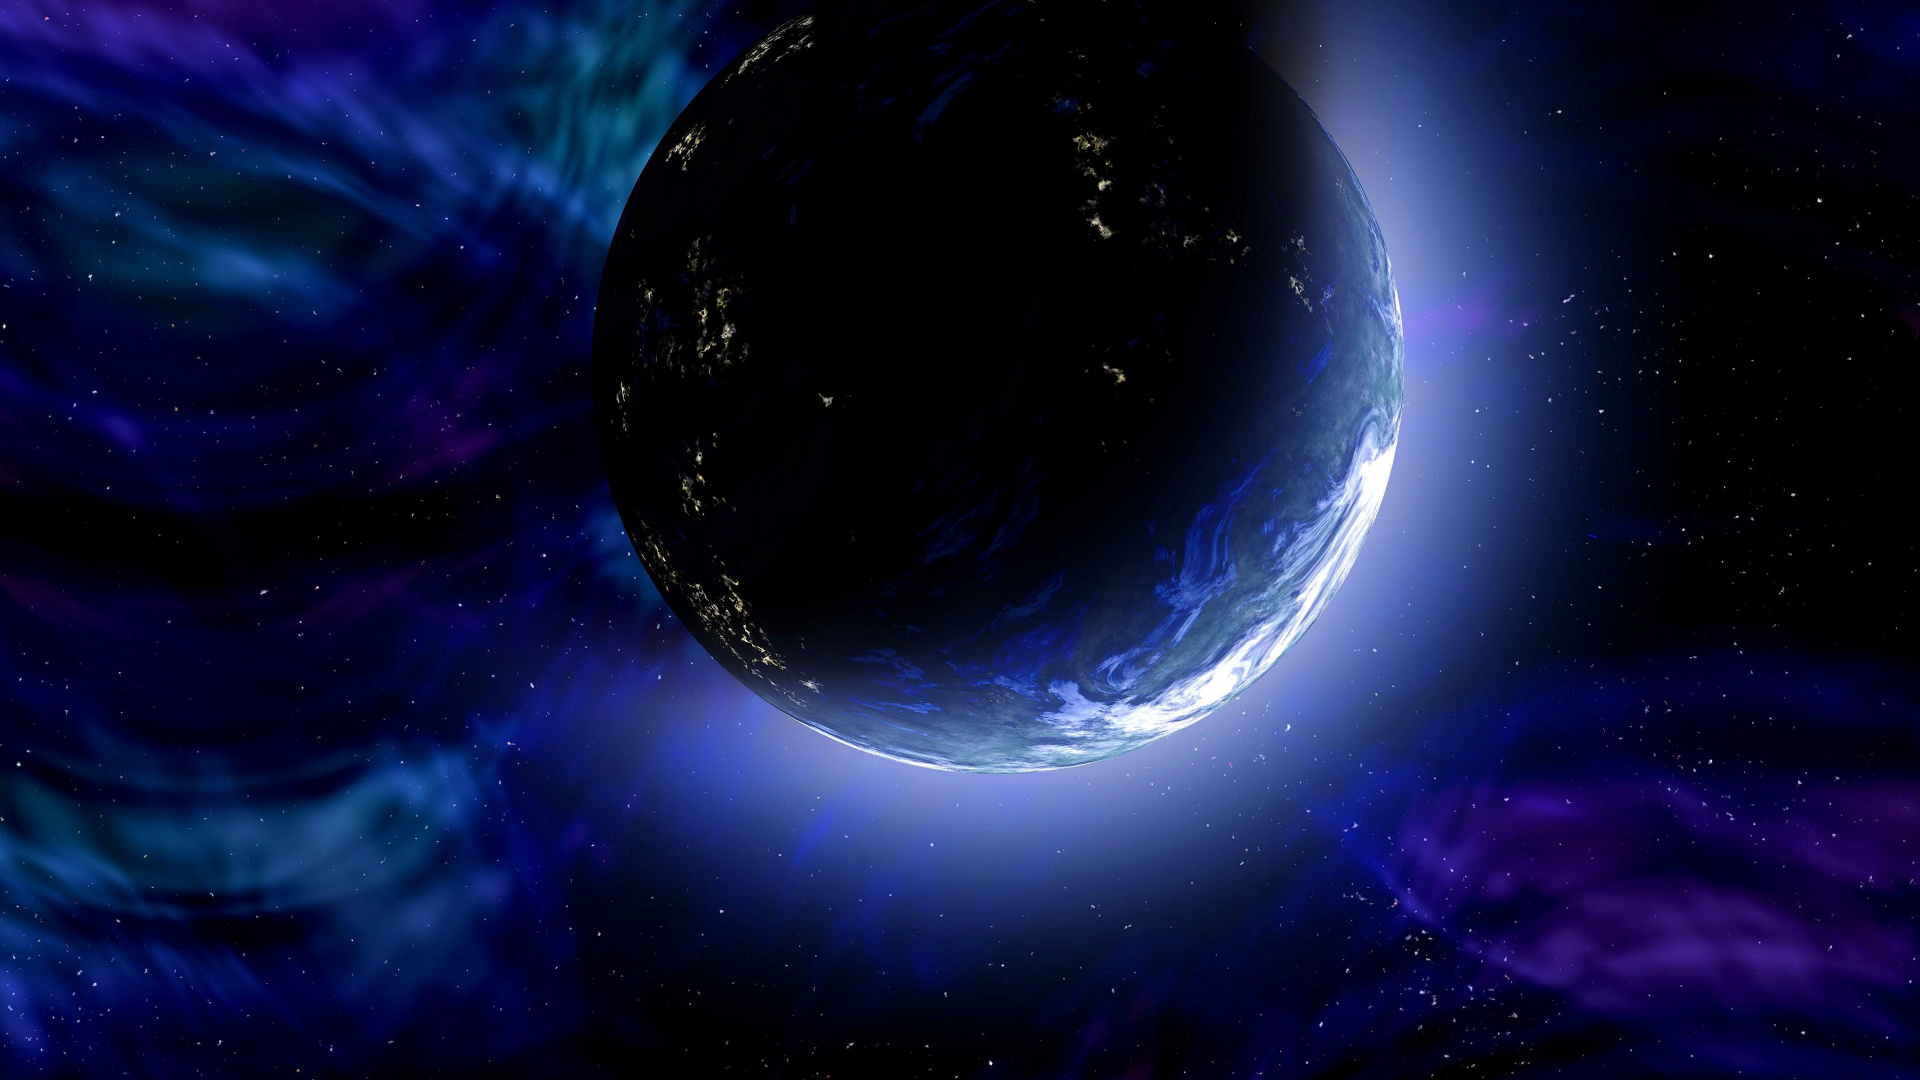 Blue and White Planet Painting. Wallpaper in 1920x1080 Resolution